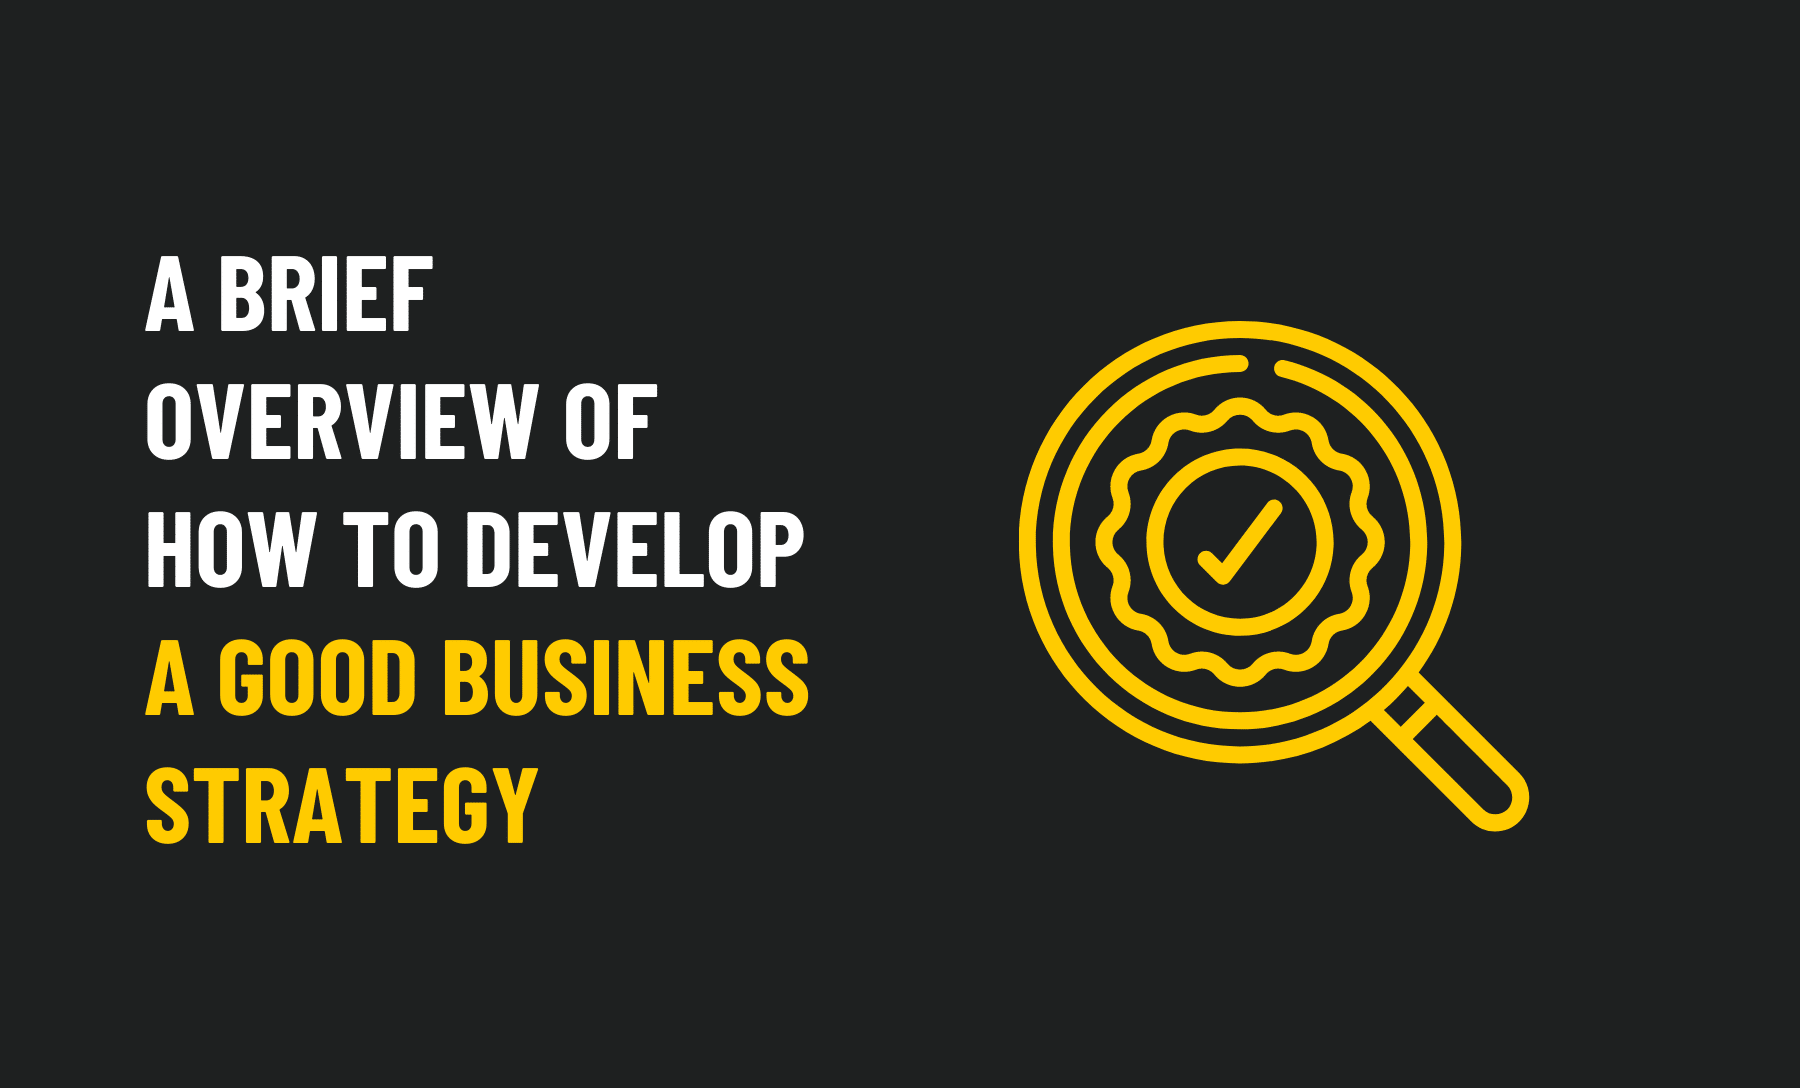 A Brief Overview of How to Develop a Good Business Strategy